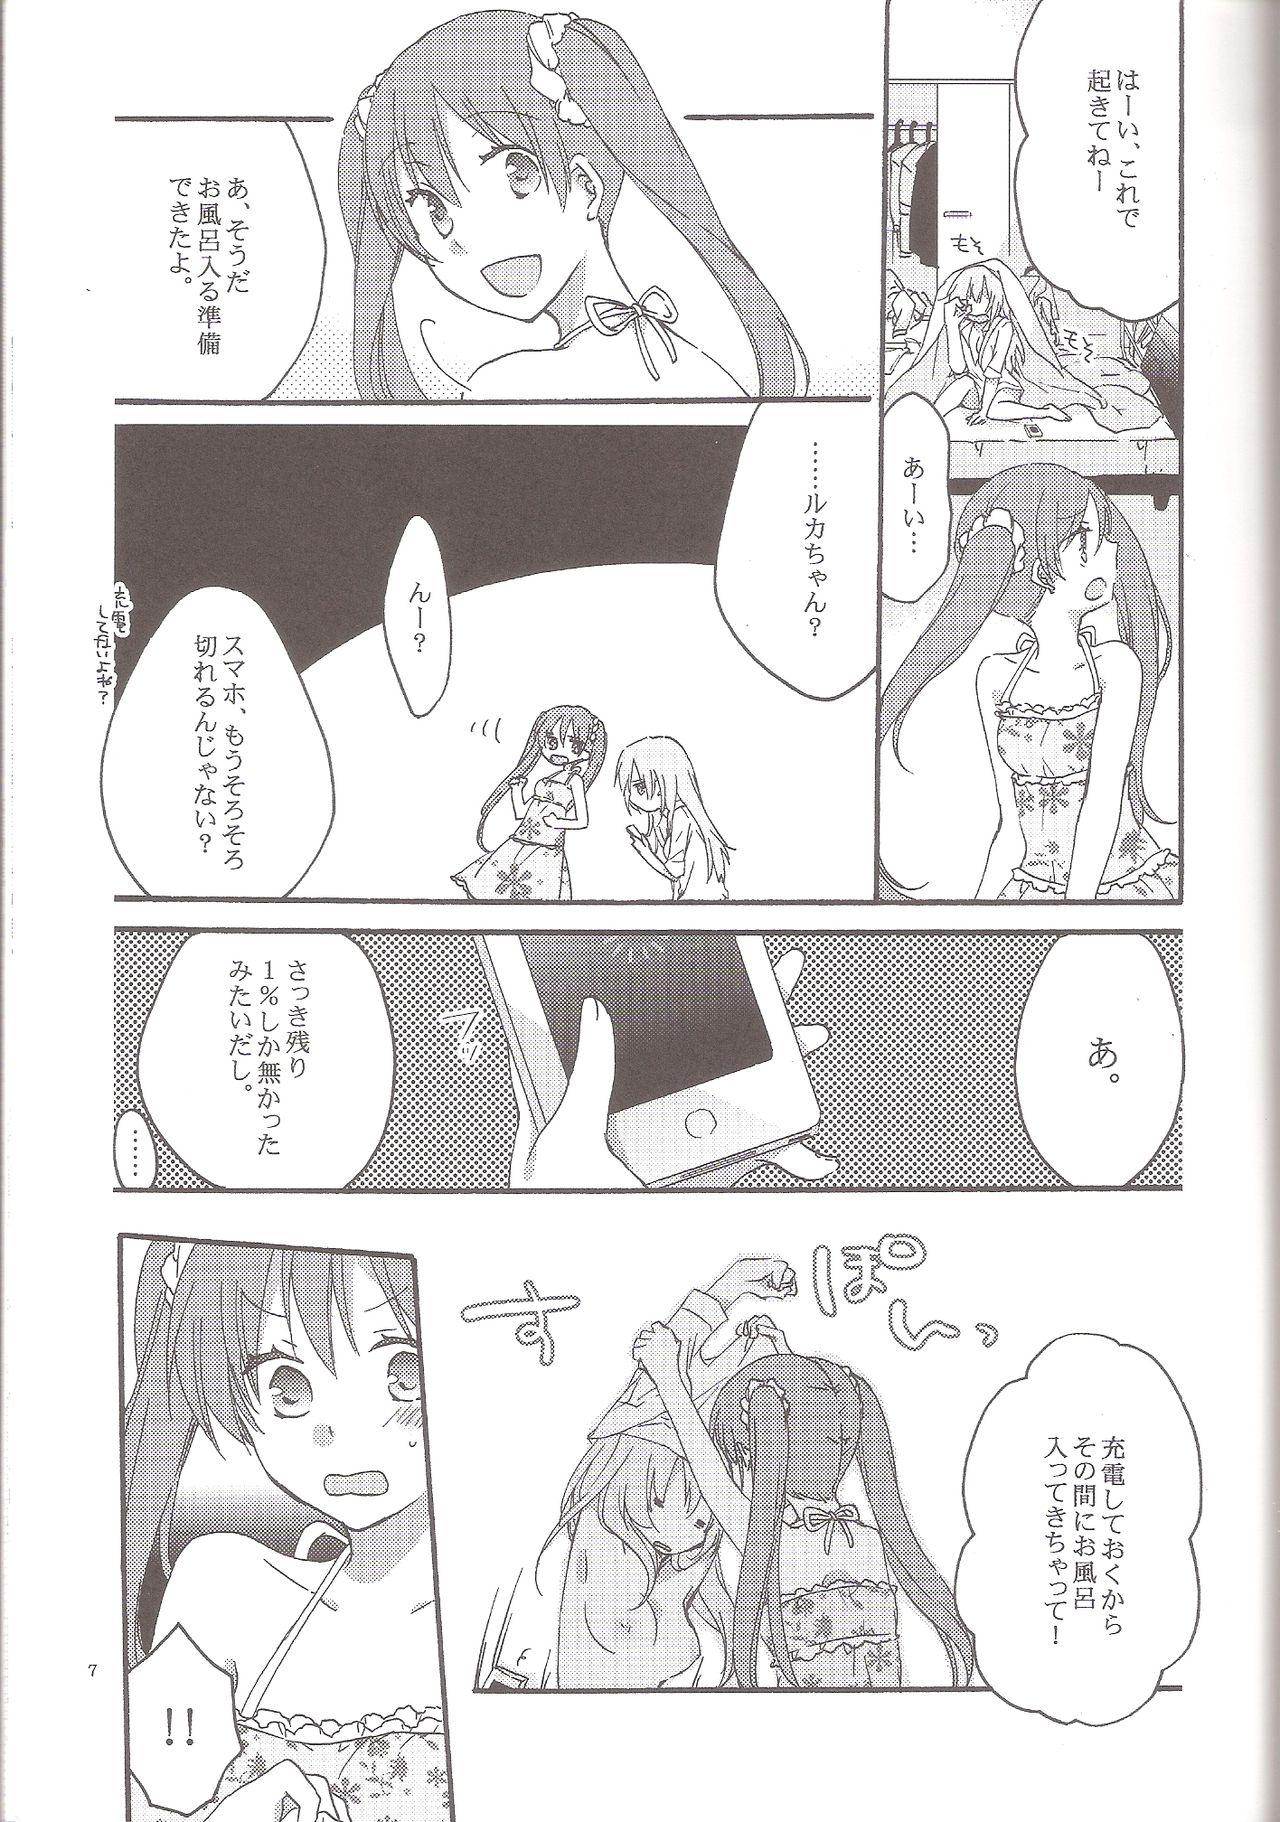 Tgirls Have a nice holiday - Vocaloid First Time - Page 6